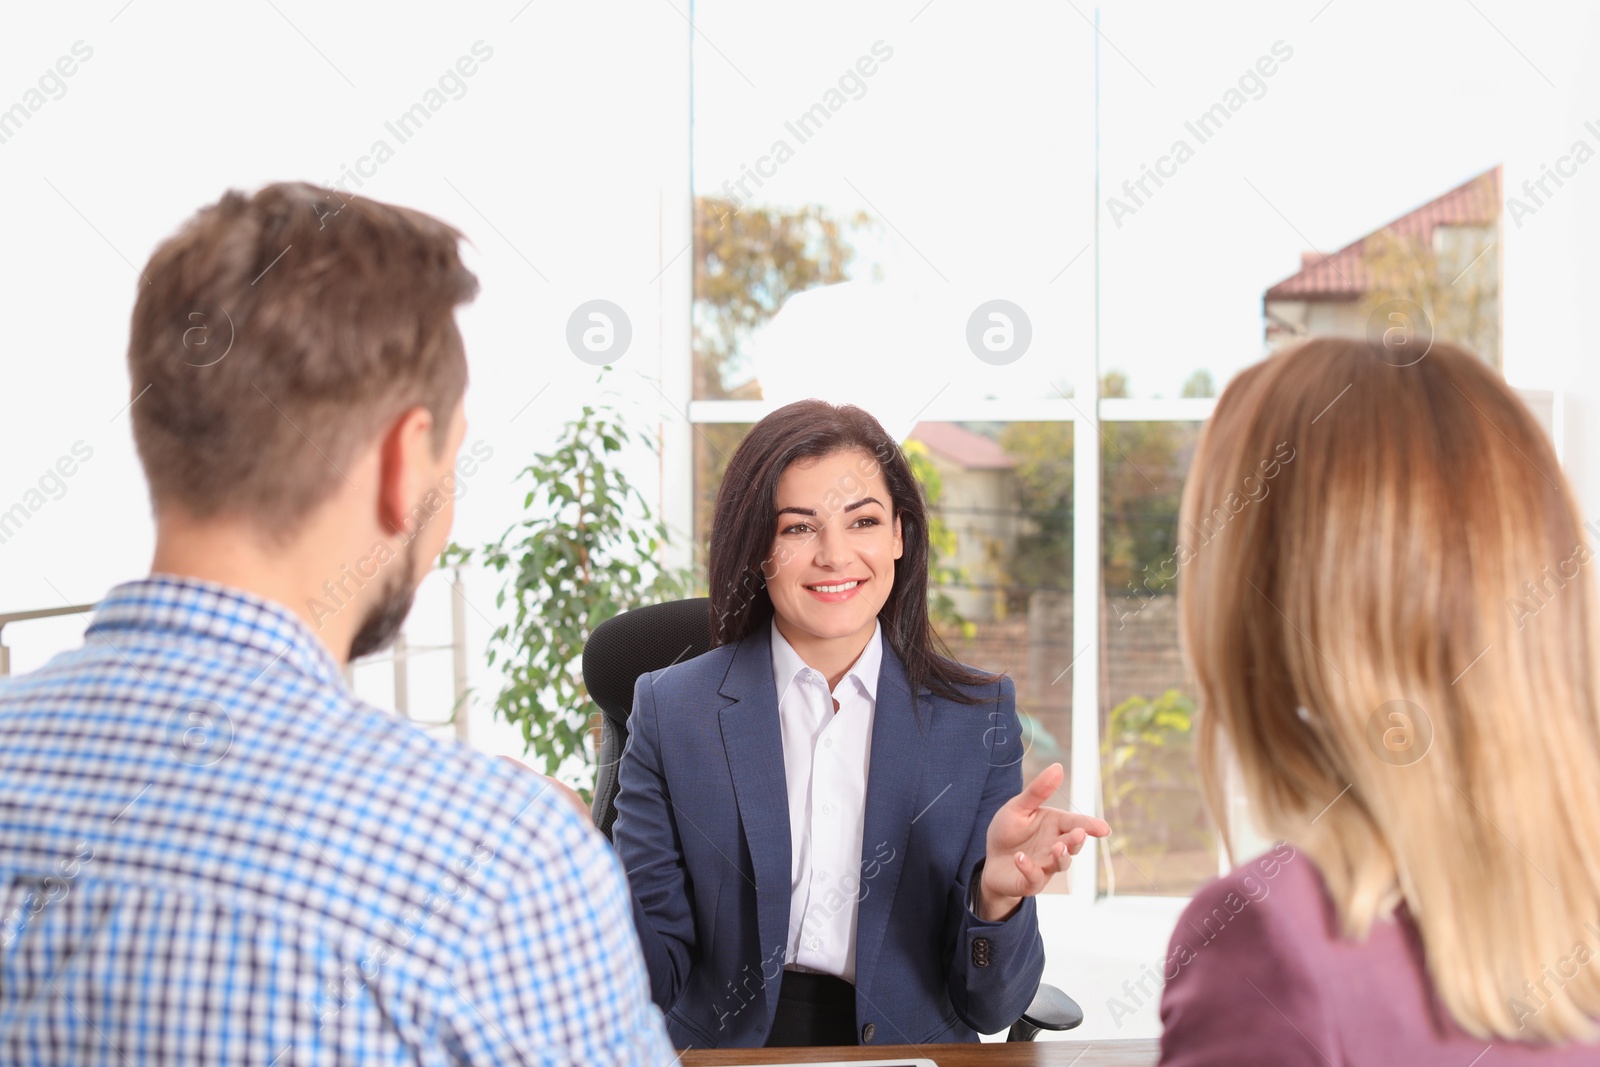 Photo of Human resources manager conducting job interview with applicants in office